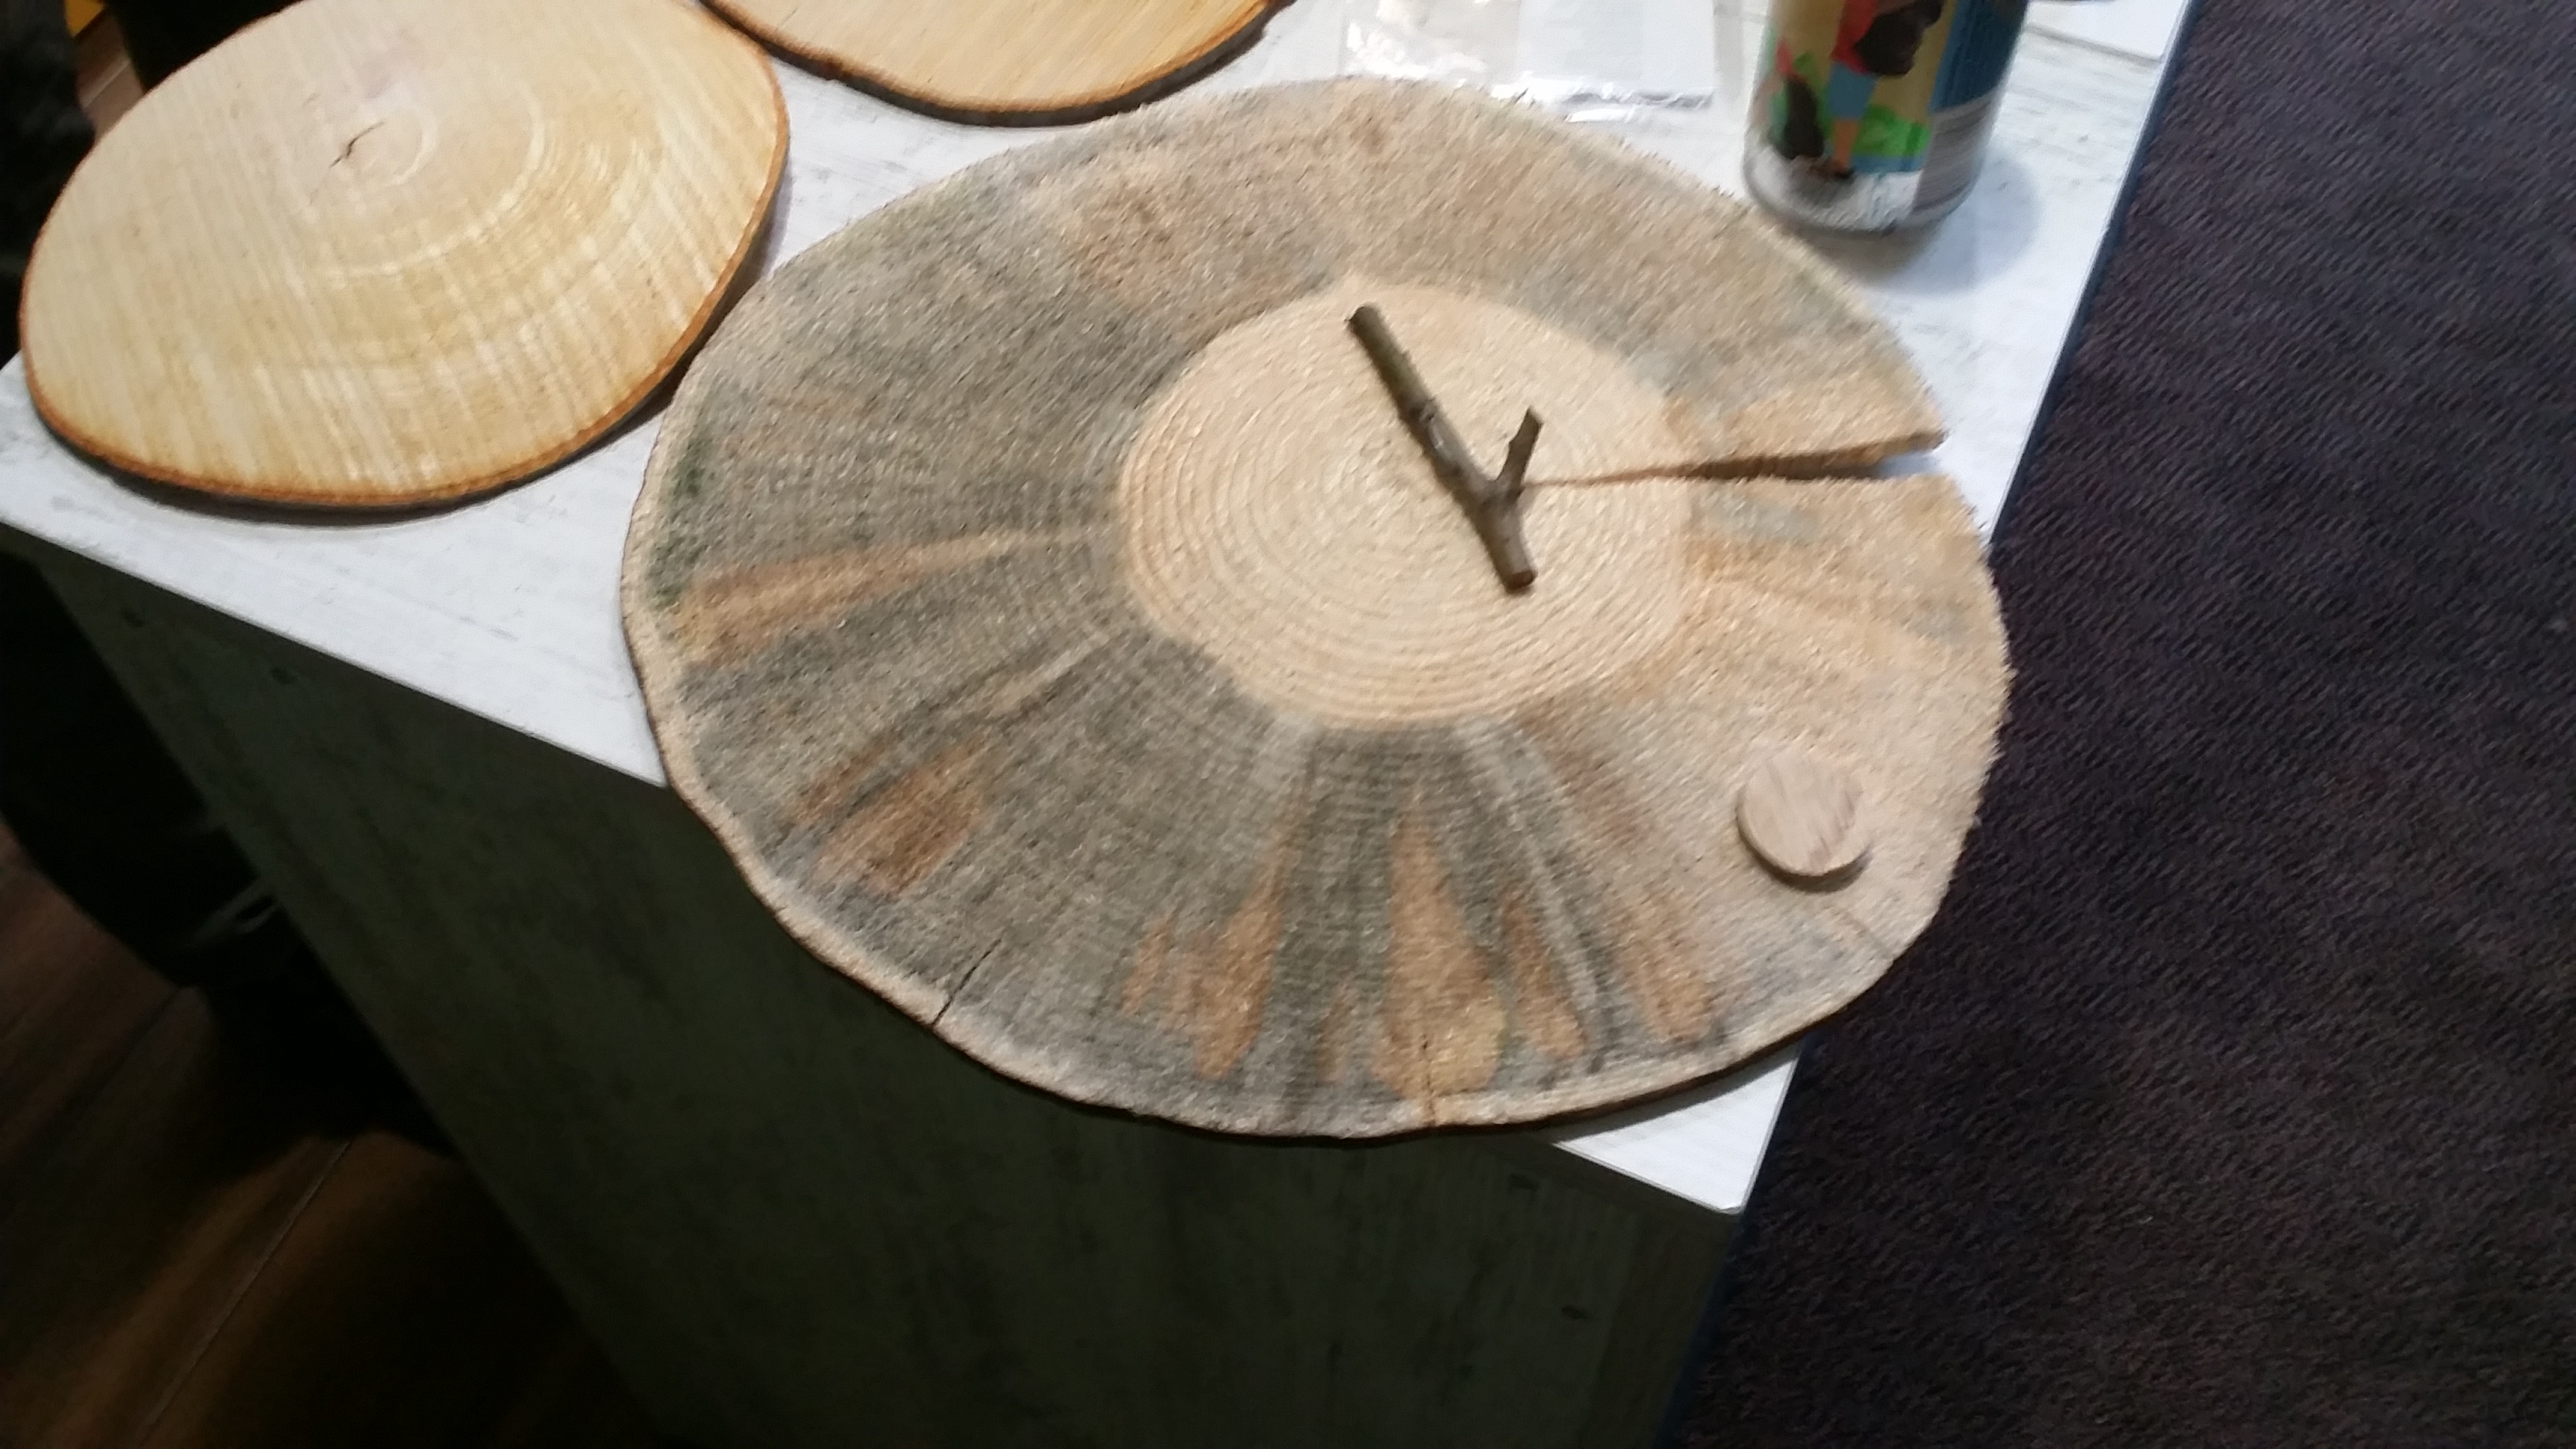 Pavel sawed some more thin slices from the same tree.